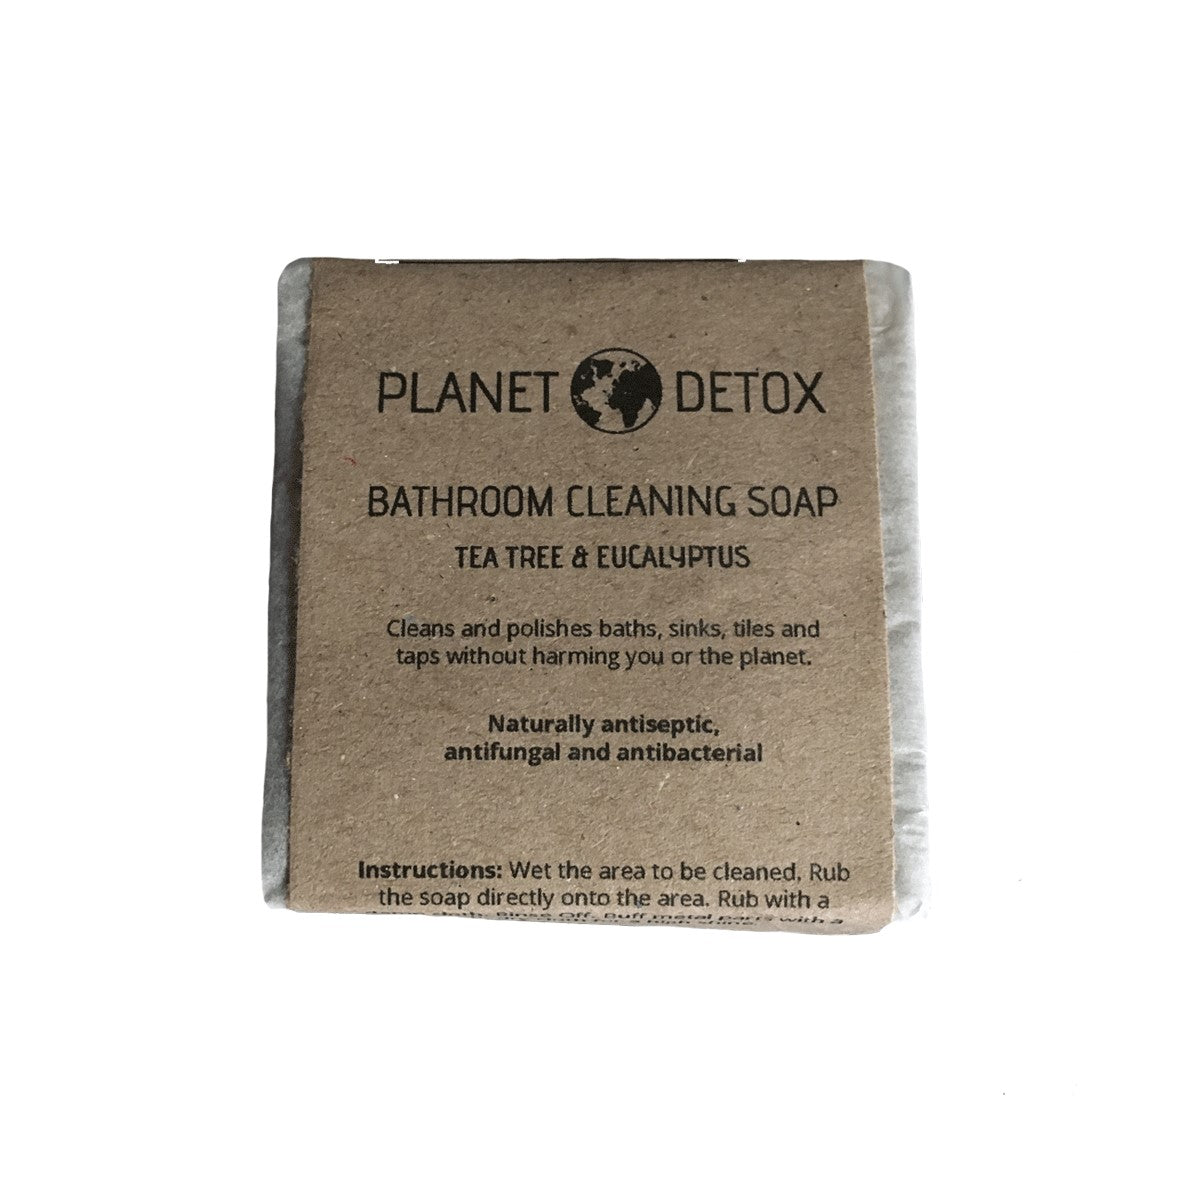 PlanetDetox Bathroom Cleaning Soap